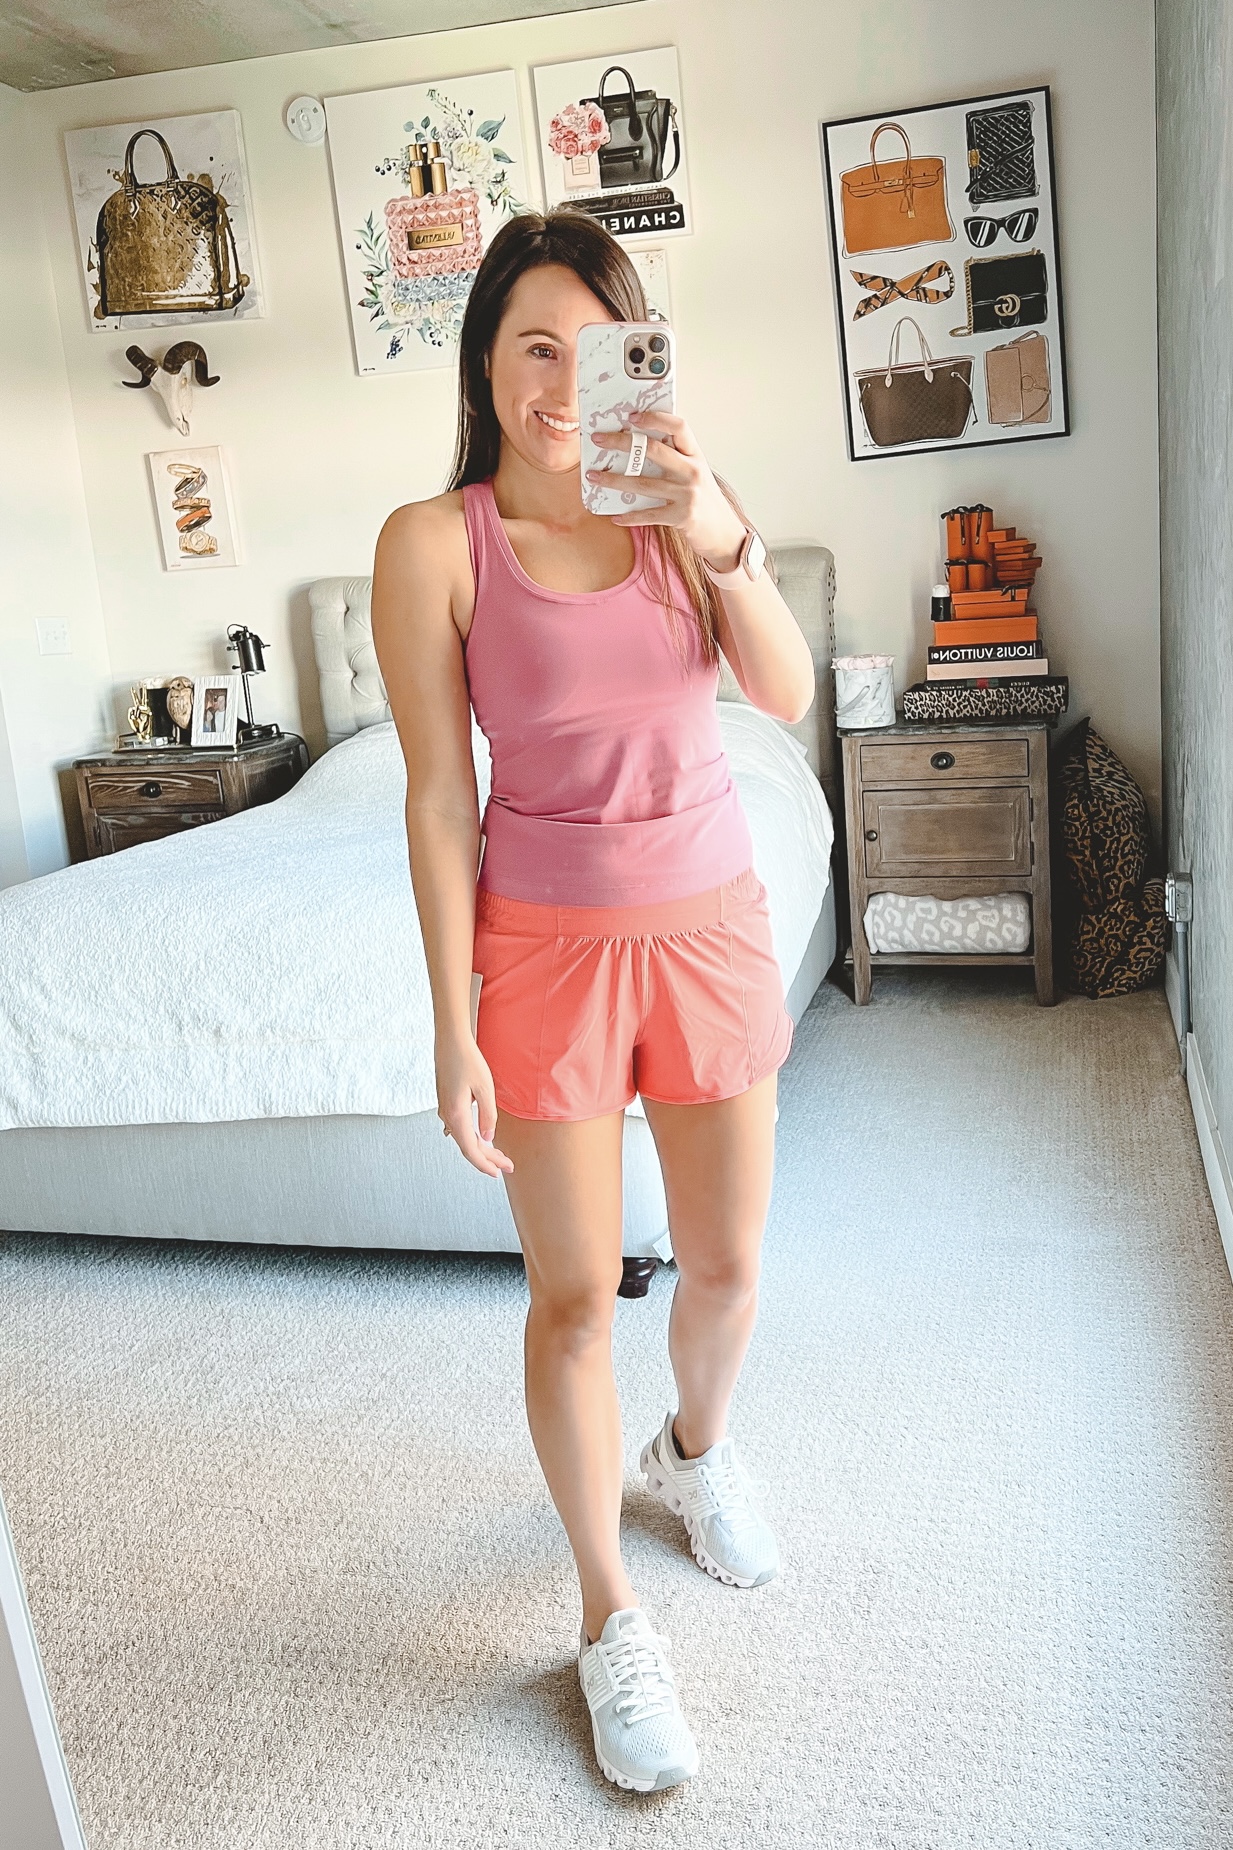 NEW LULULEMON SHORTS TRY ON REVIEW / HOTTY HOT HIGH RISE LINED SHORT HAUL 